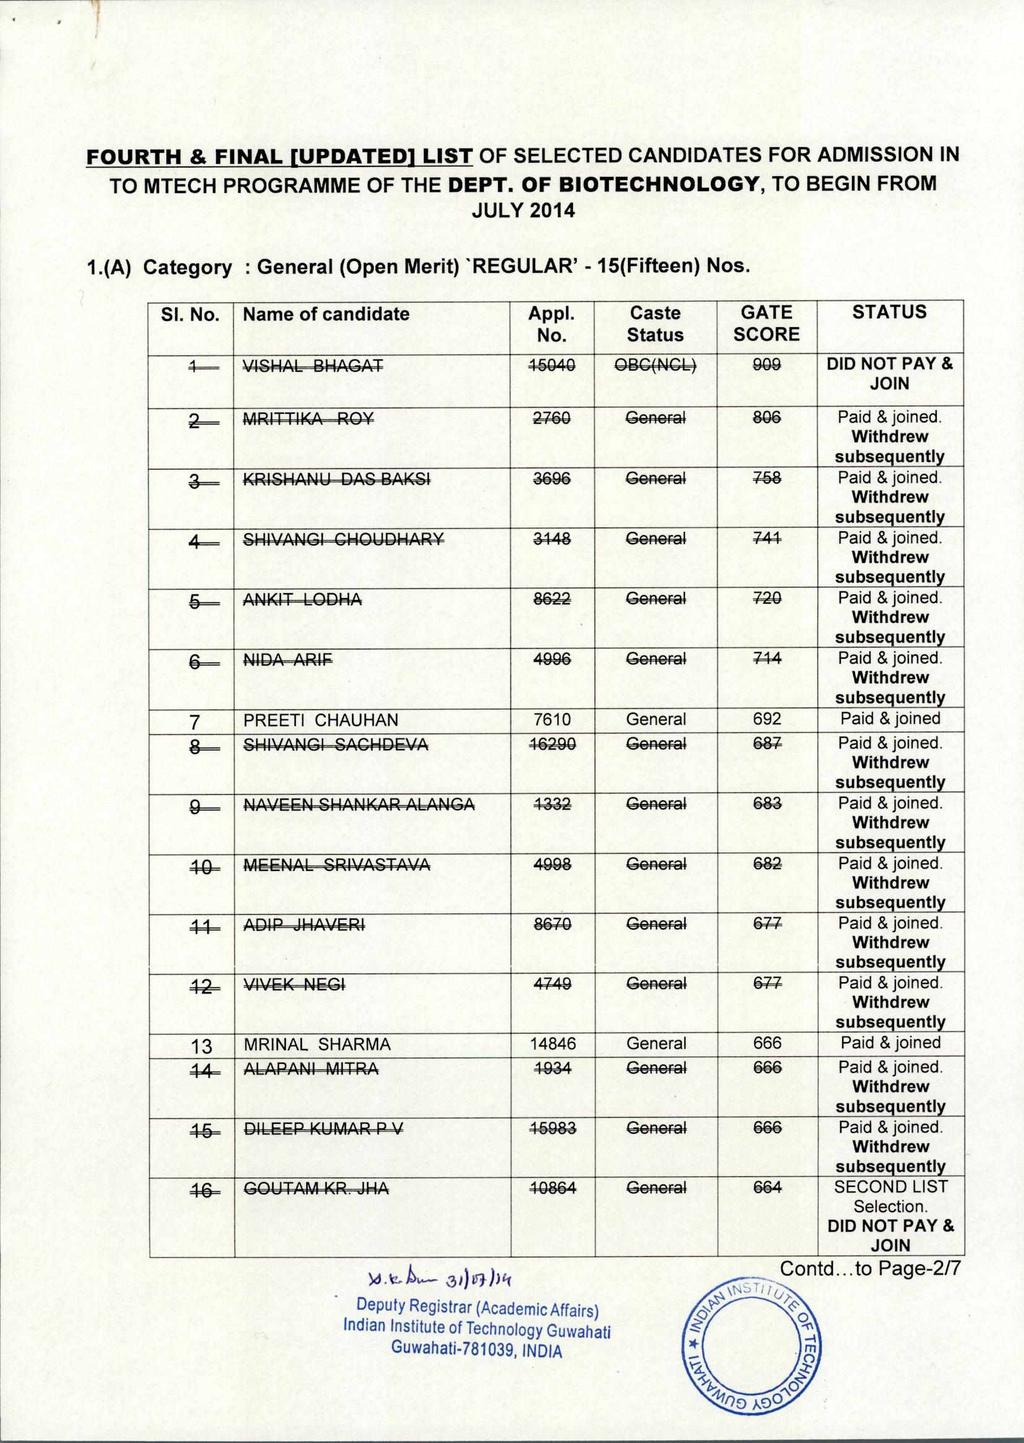 FOURTH & FINAL [UPDATED] LIST OF SELECTED CANDIDATES FOR ADMISSION IN TO MTECH PROGRAMME OF THE DEPT. OF BIOTECHNOLOGY, TO BEGIN FROM JULY 2014 1.